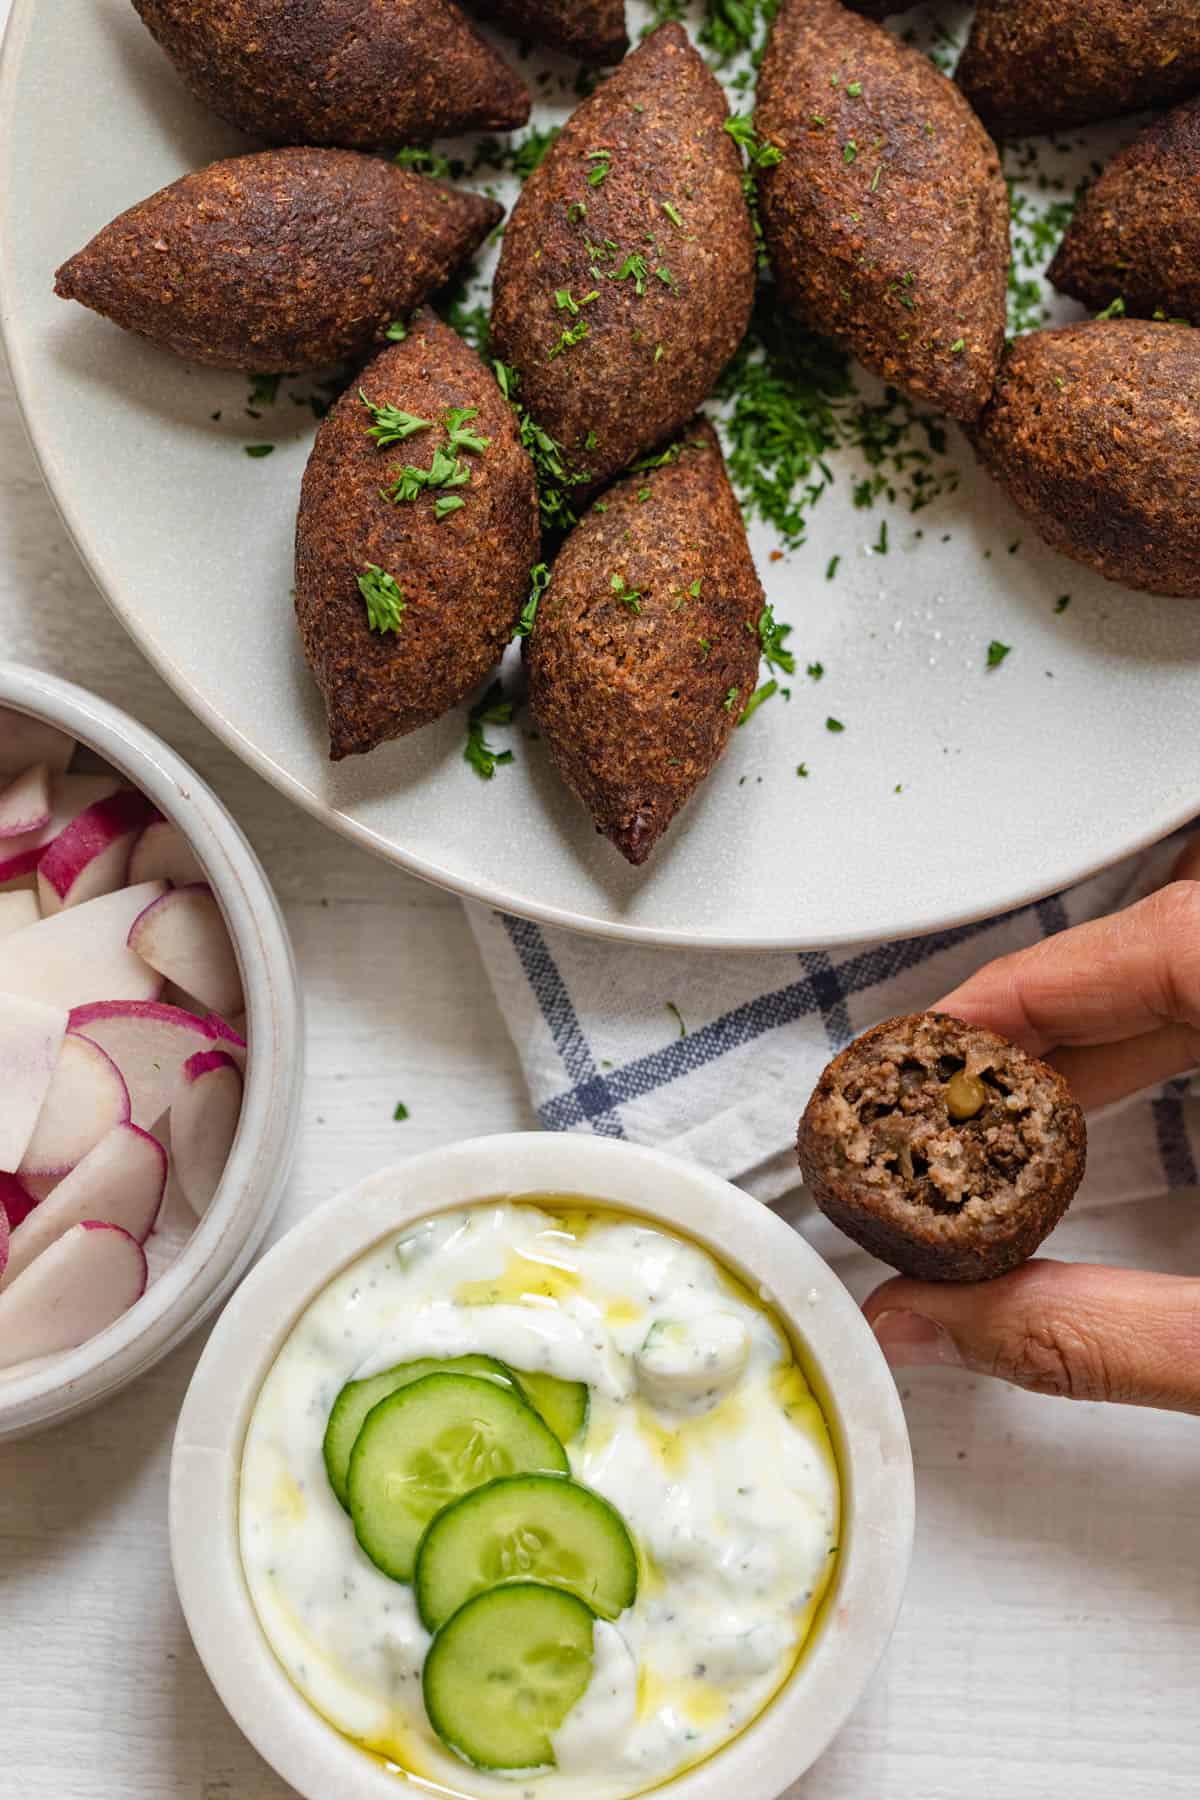 Showing the inside of the kibbeh after biting into one